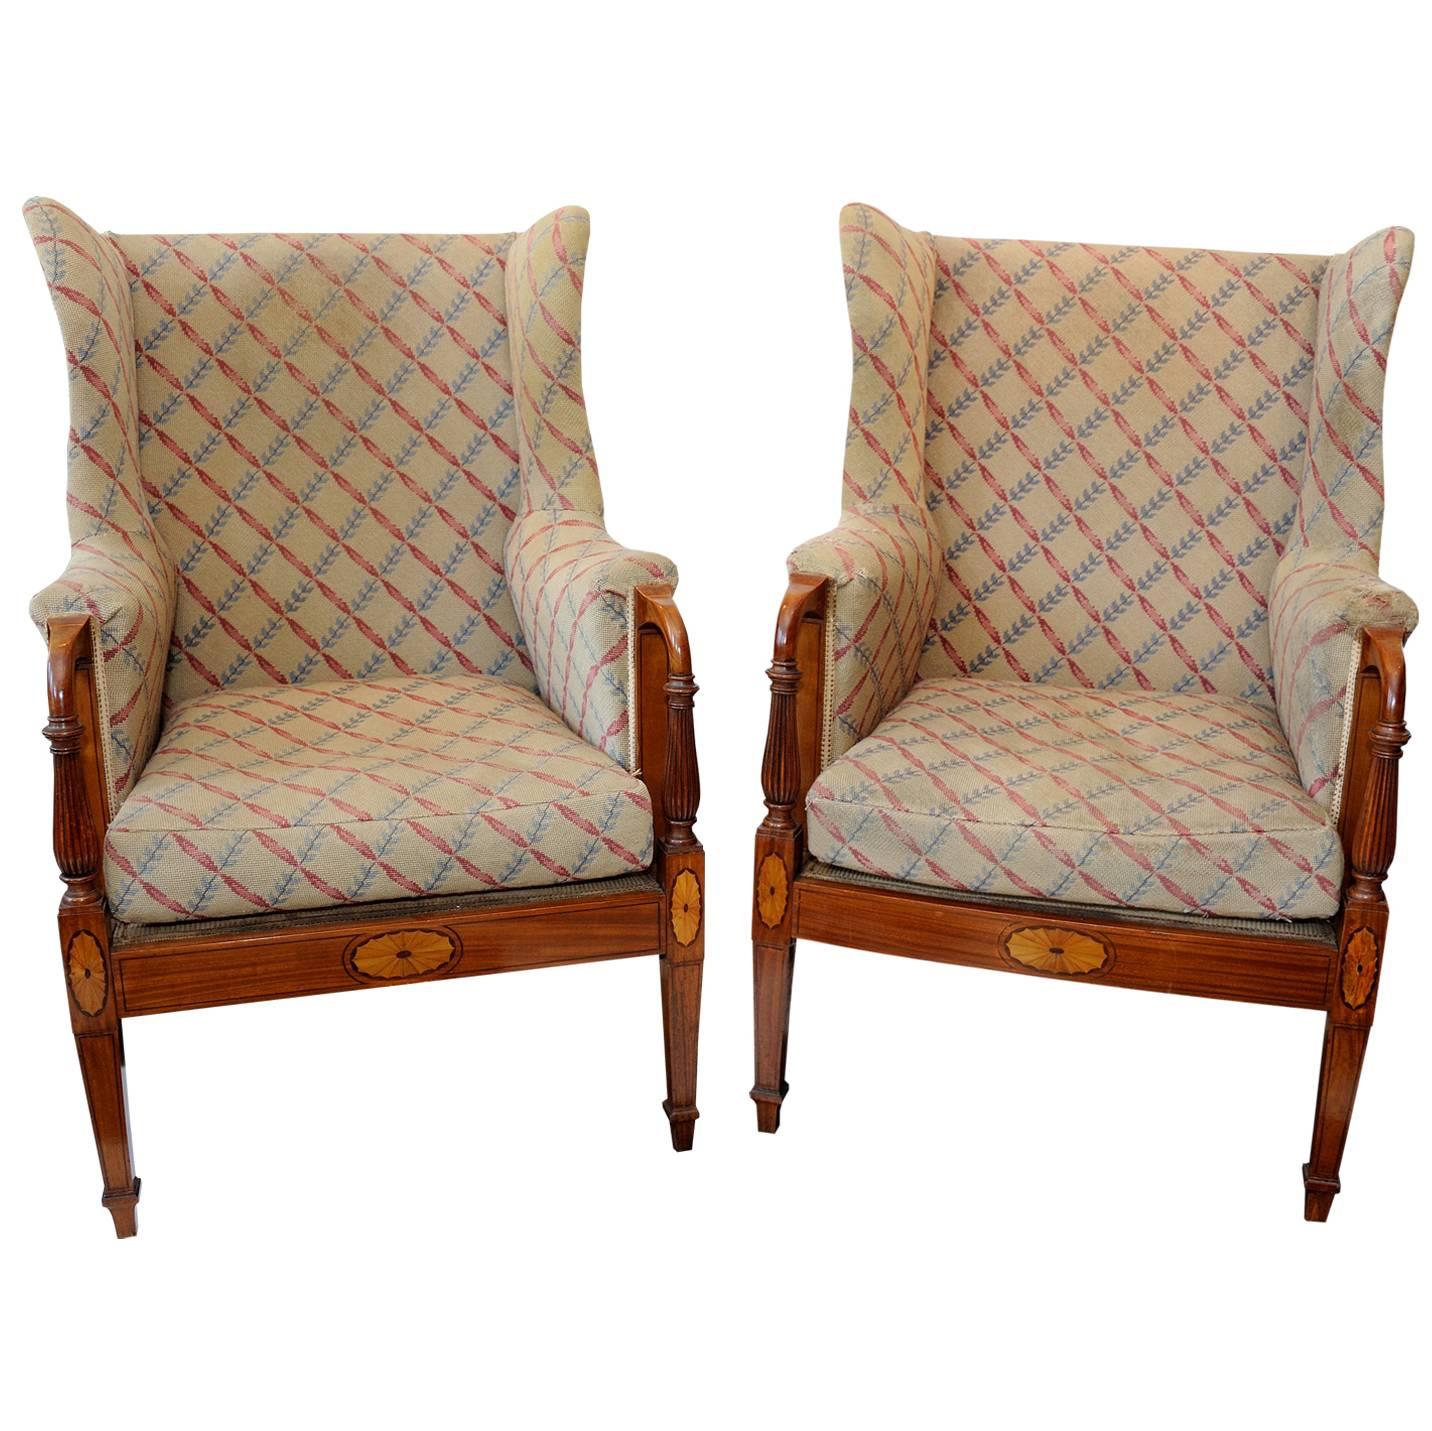 Rare Pair of English Country House Satinwood Wing Chairs, circa 1890